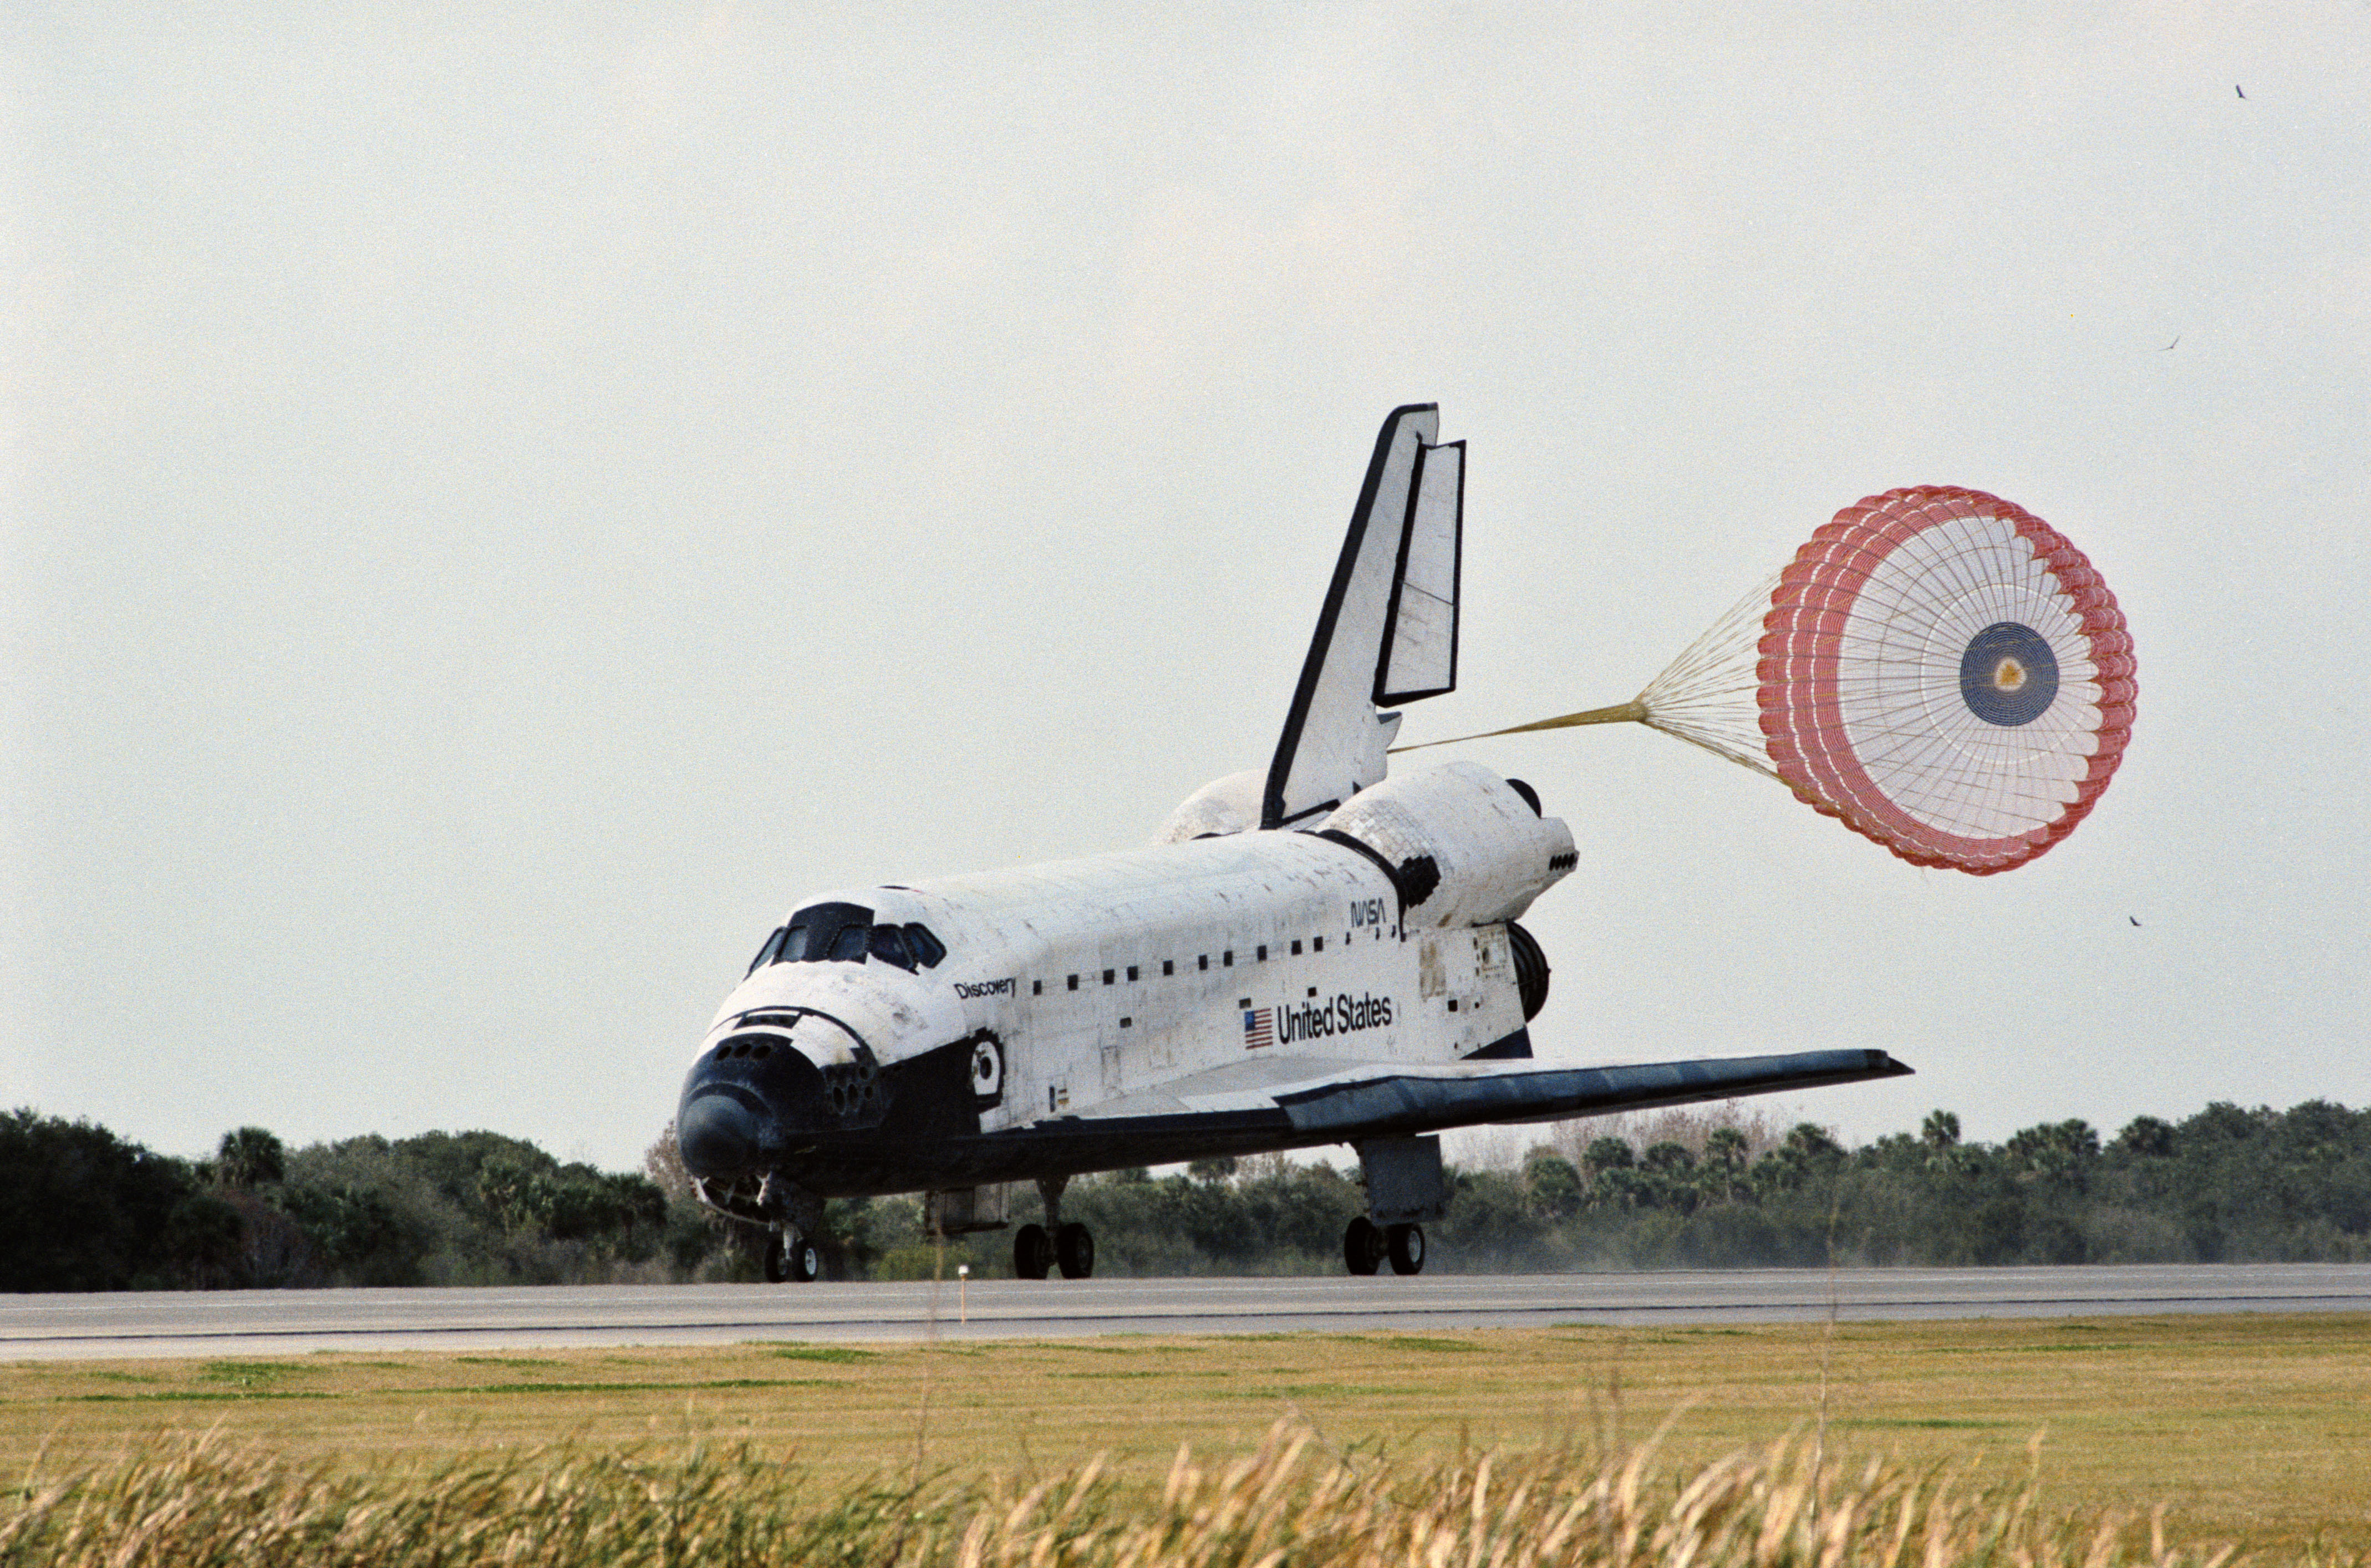 Bolden makes a perfect touchdown at NASA’s Kennedy Space Center in Florida to conclude STS-60